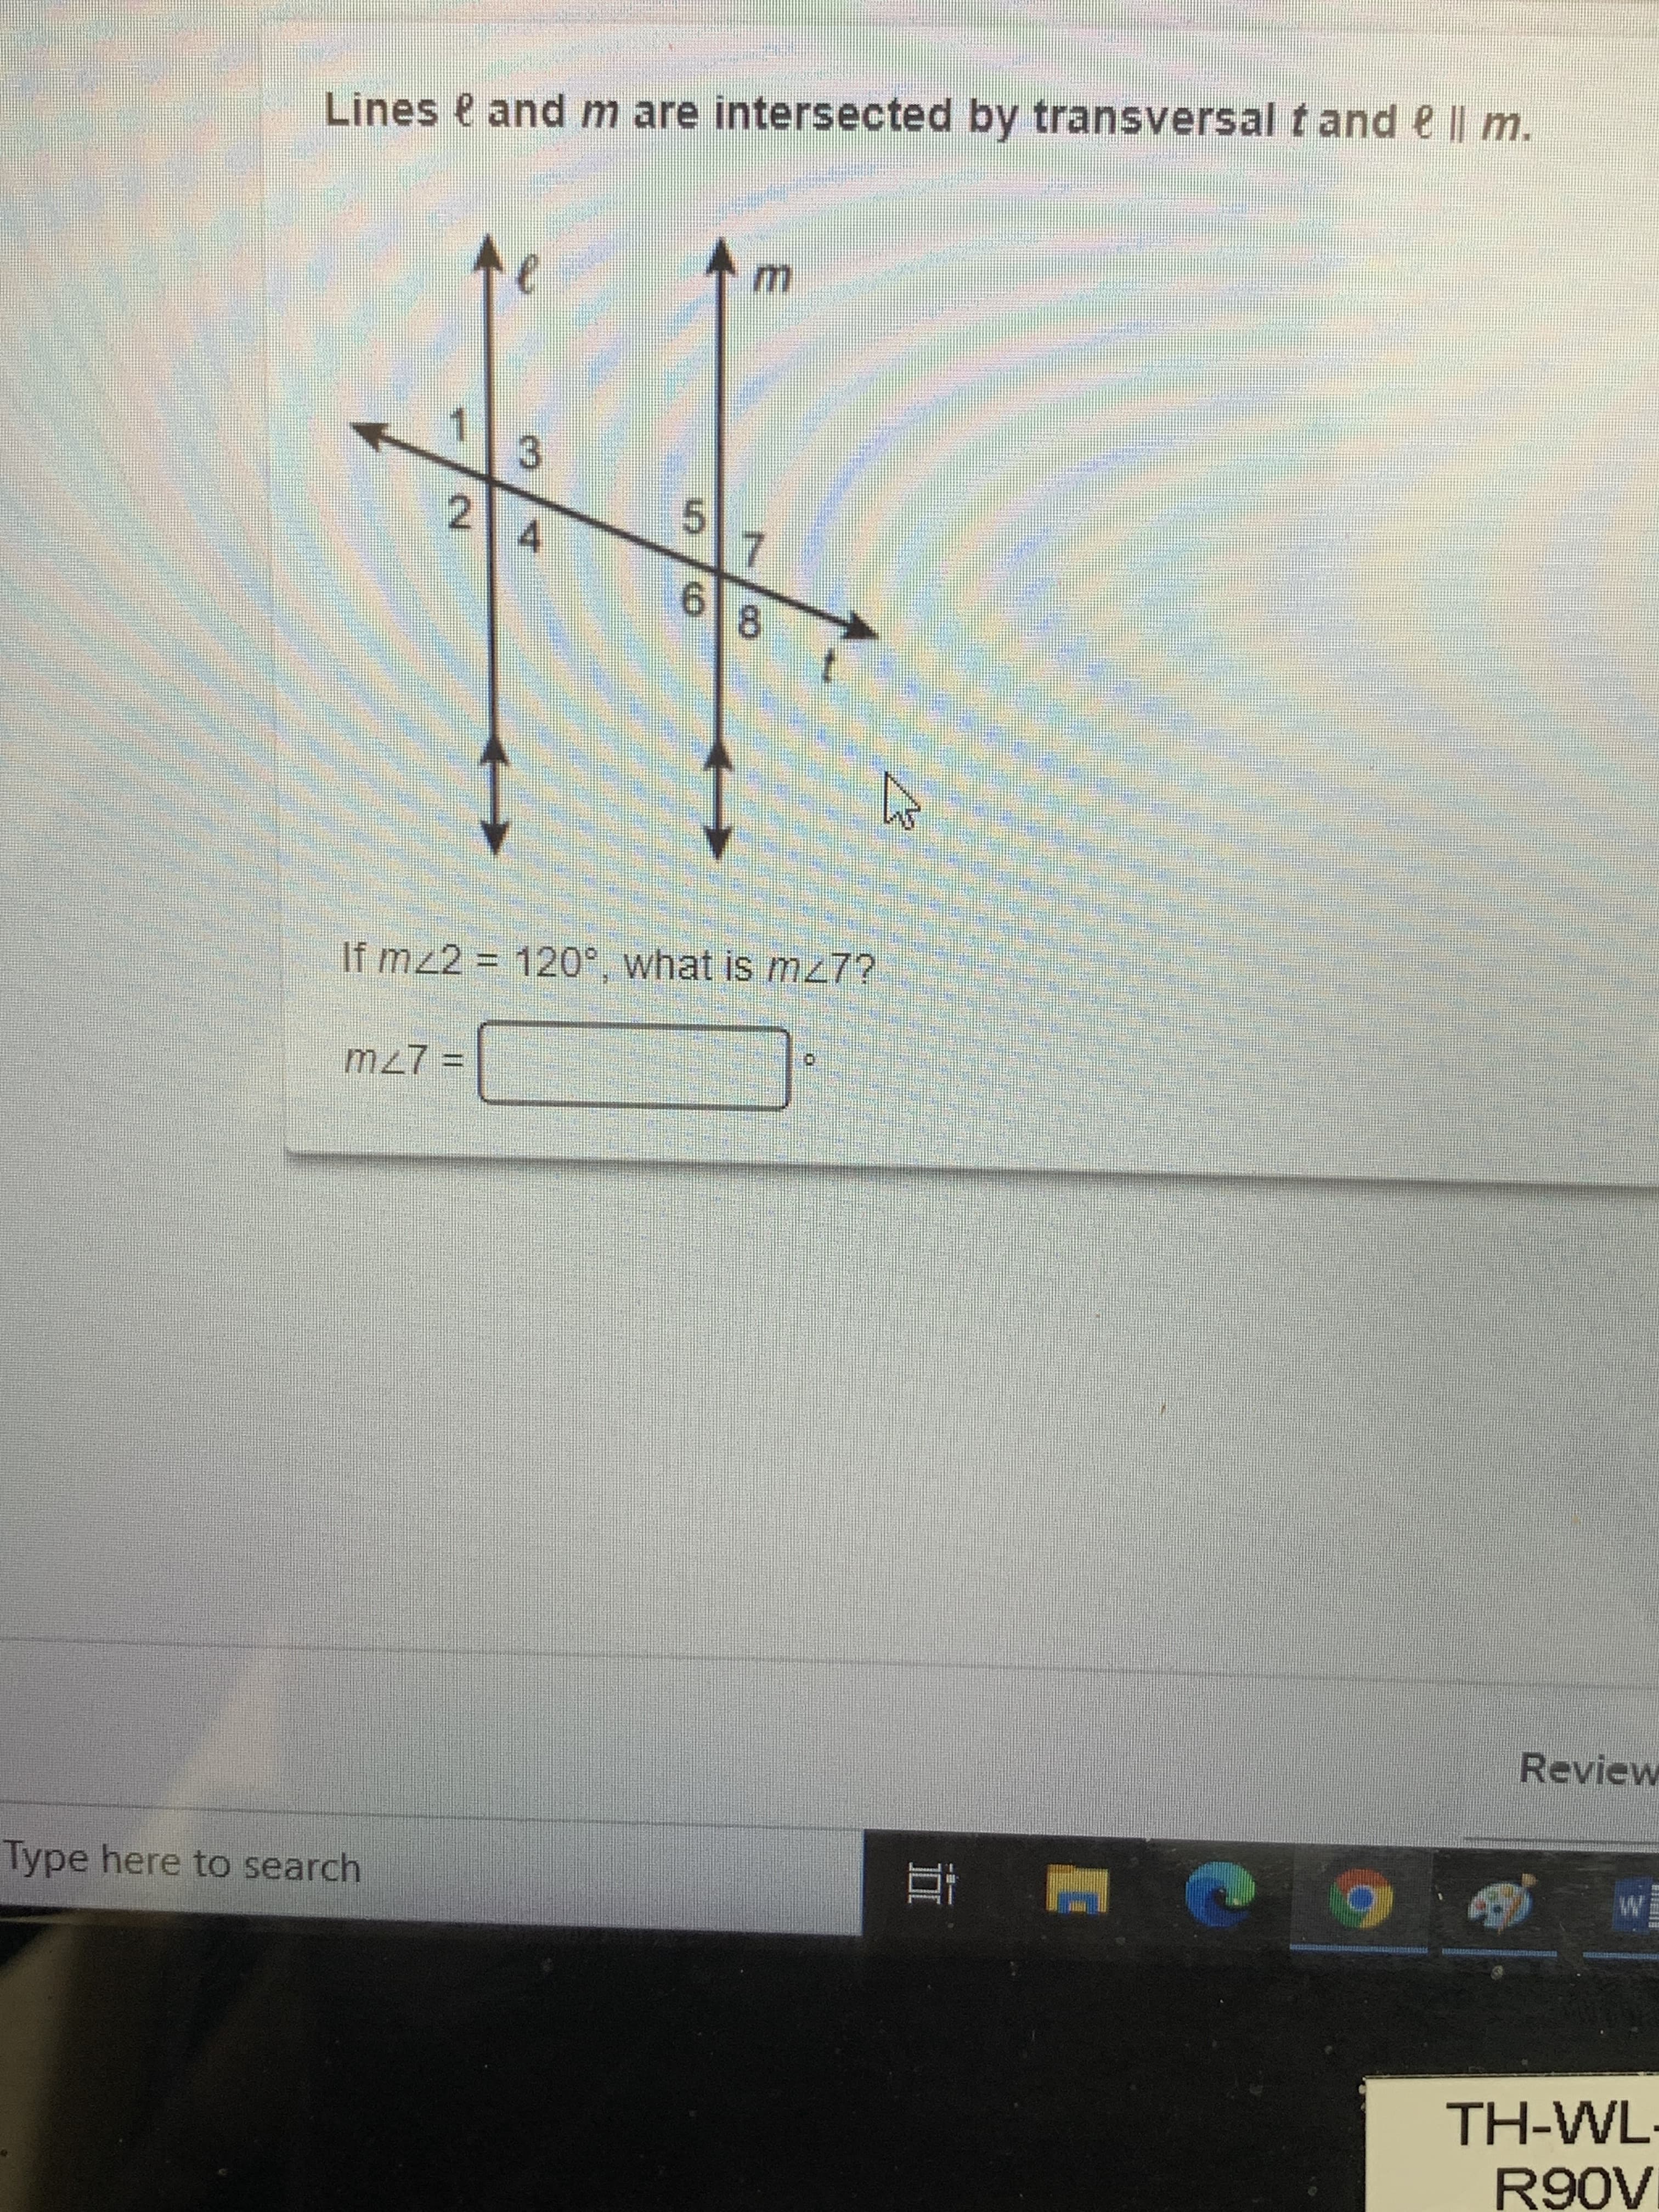 If mz2 = 120°, what is mz7?
